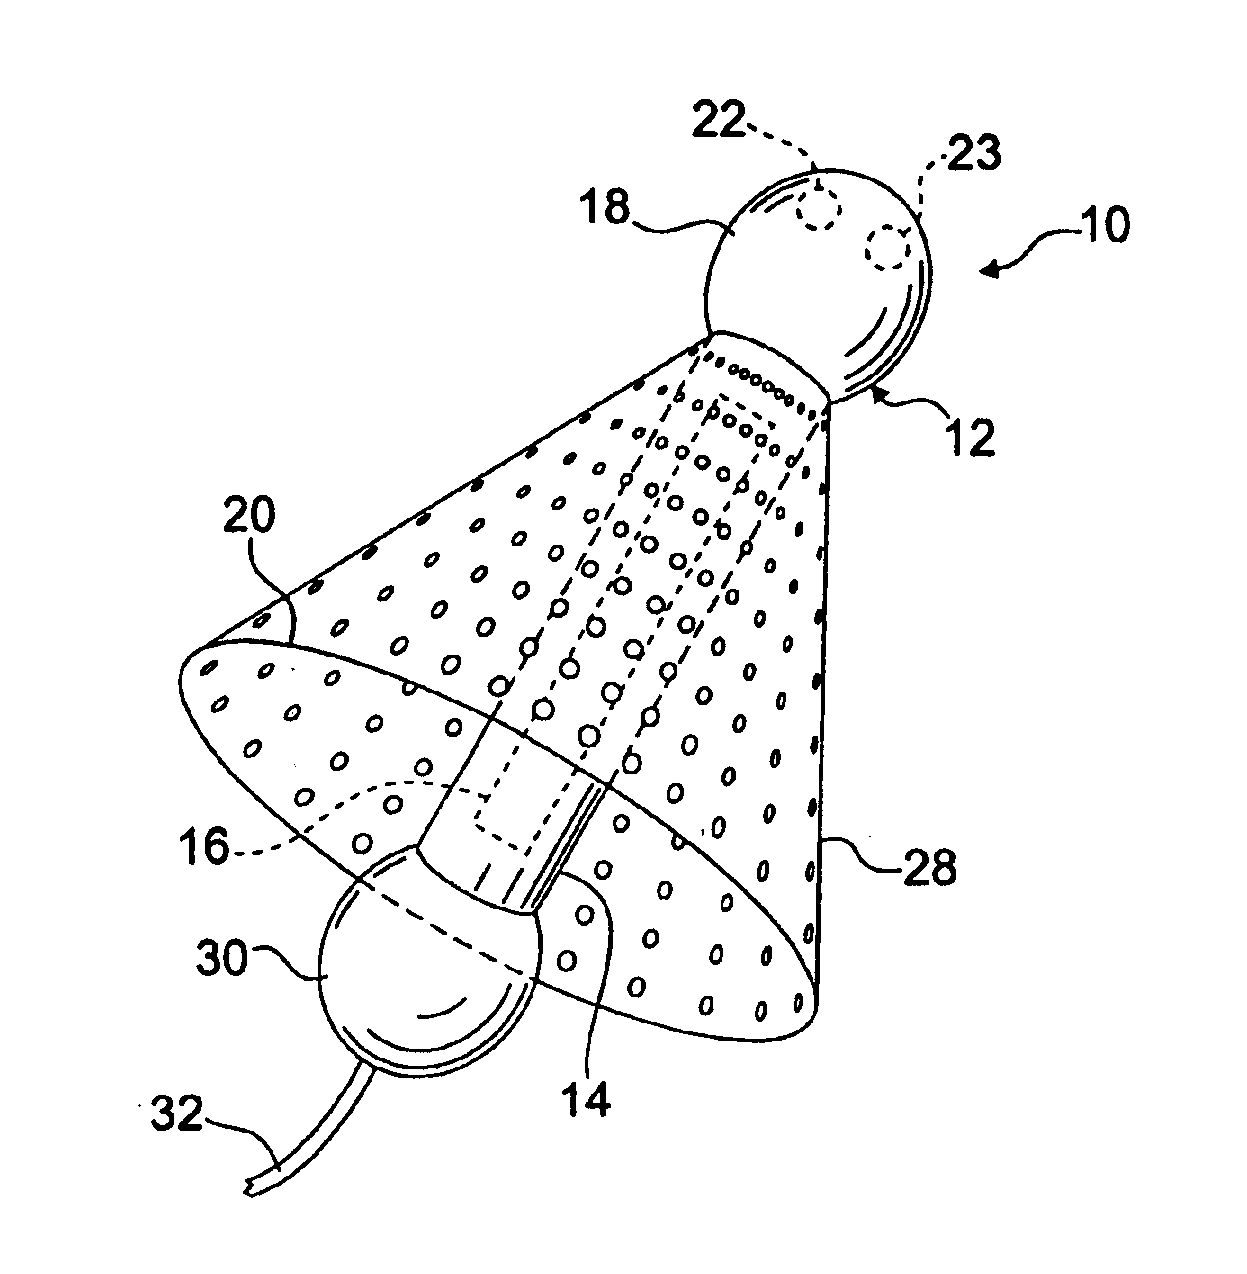 Cardiac stimulating apparatus having a blood clot filter and atrial pacer